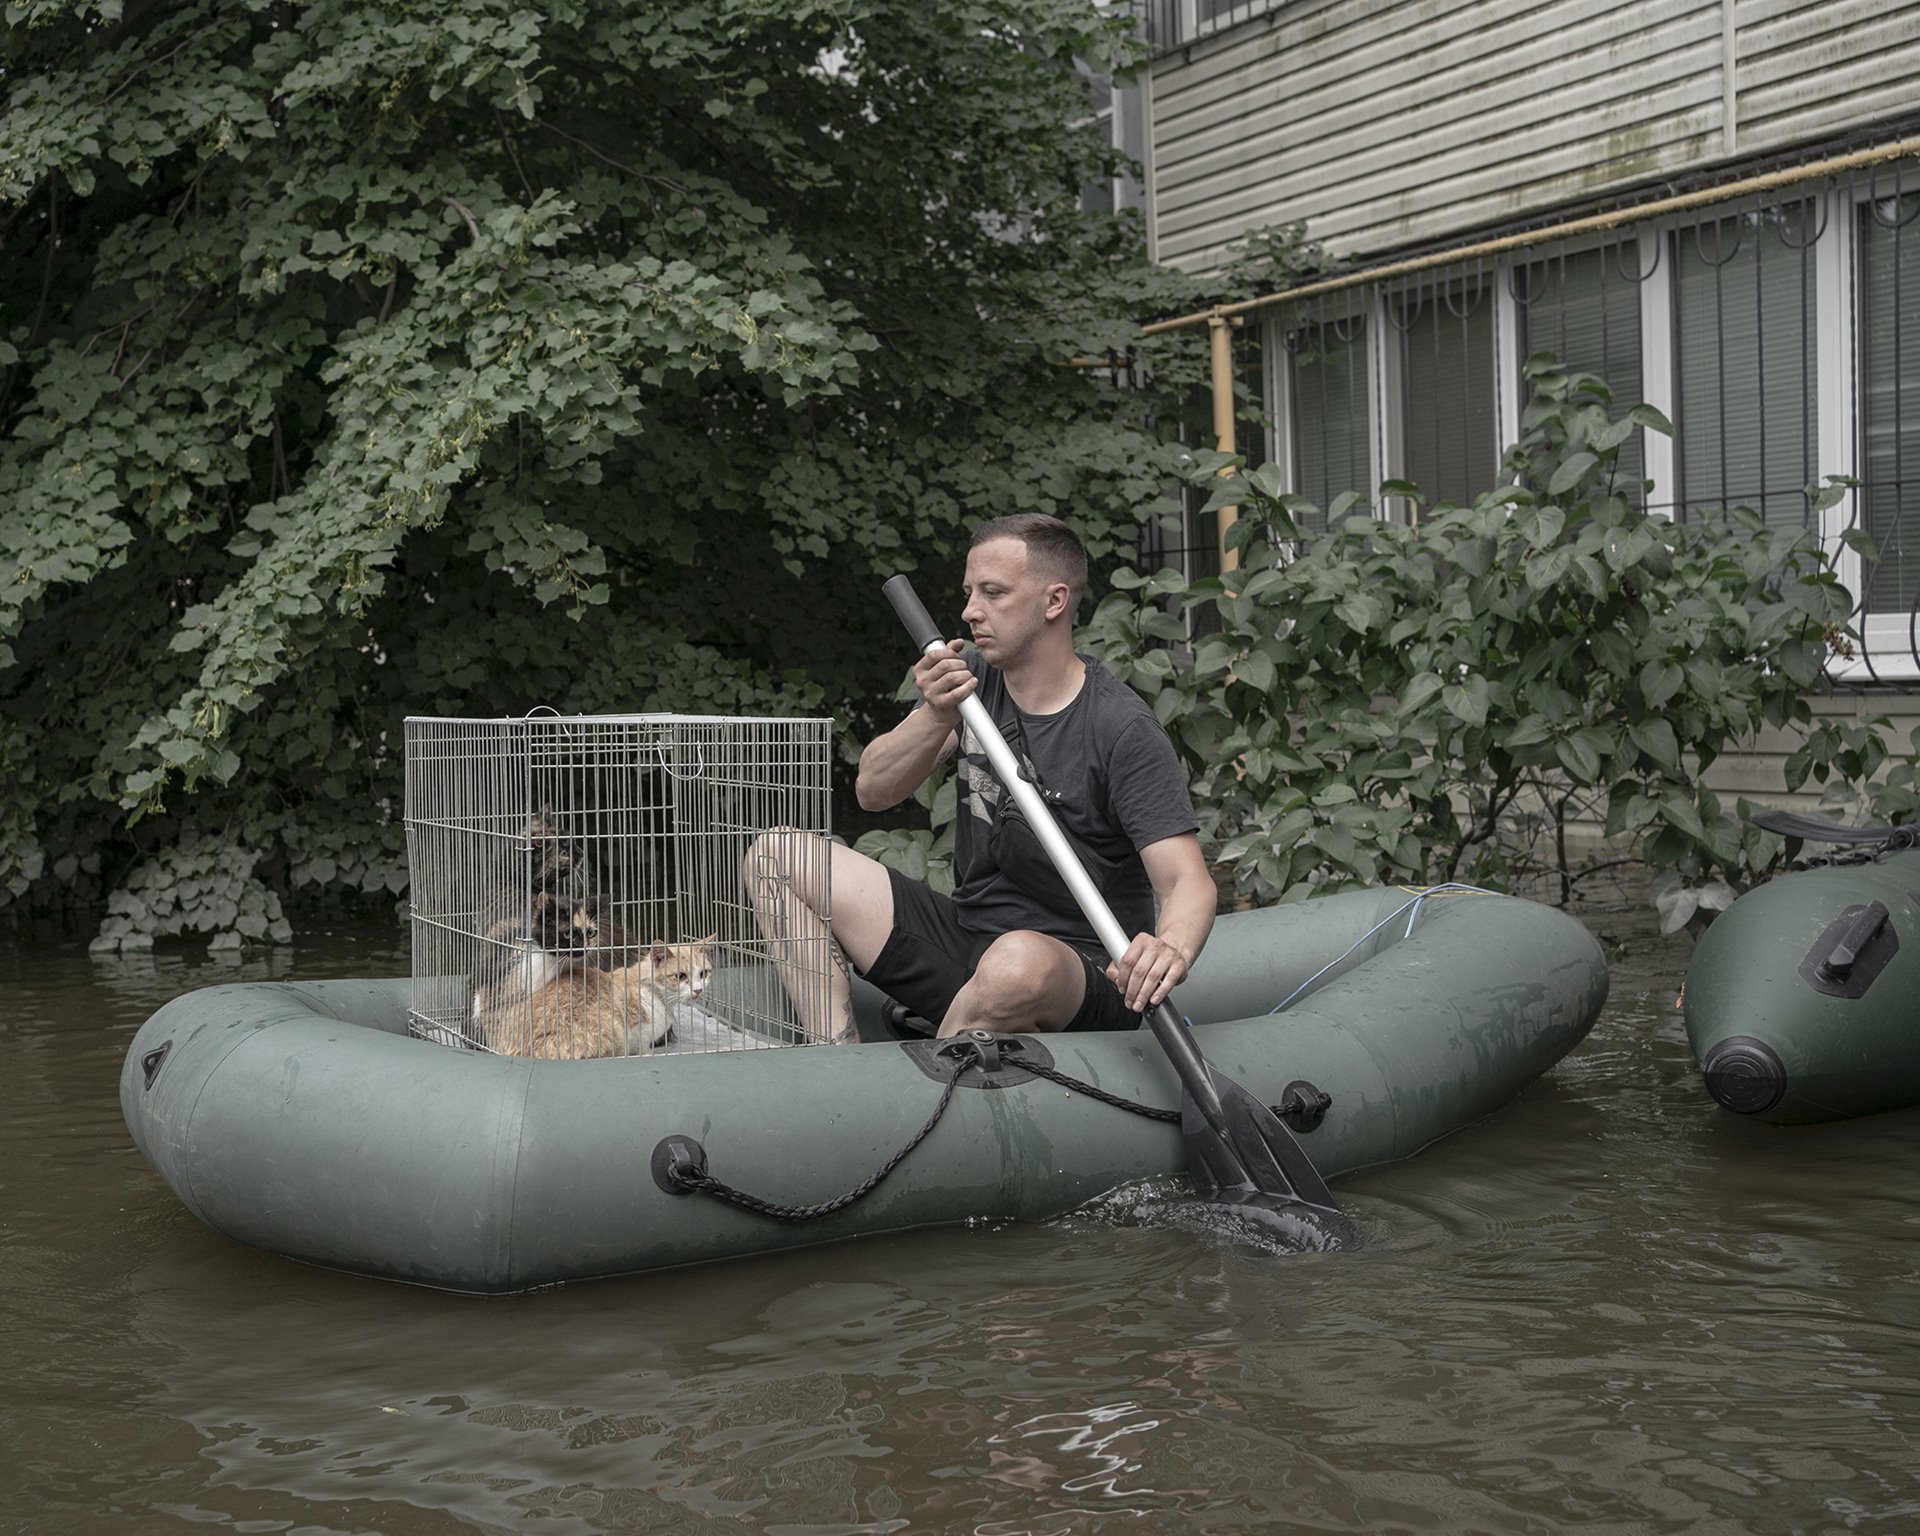 A volunteer rescues cats in the flooded harbor district in Kherson, Ukraine. Flooding from the breached Kakhovka Dam lasted for 19 days.&nbsp;